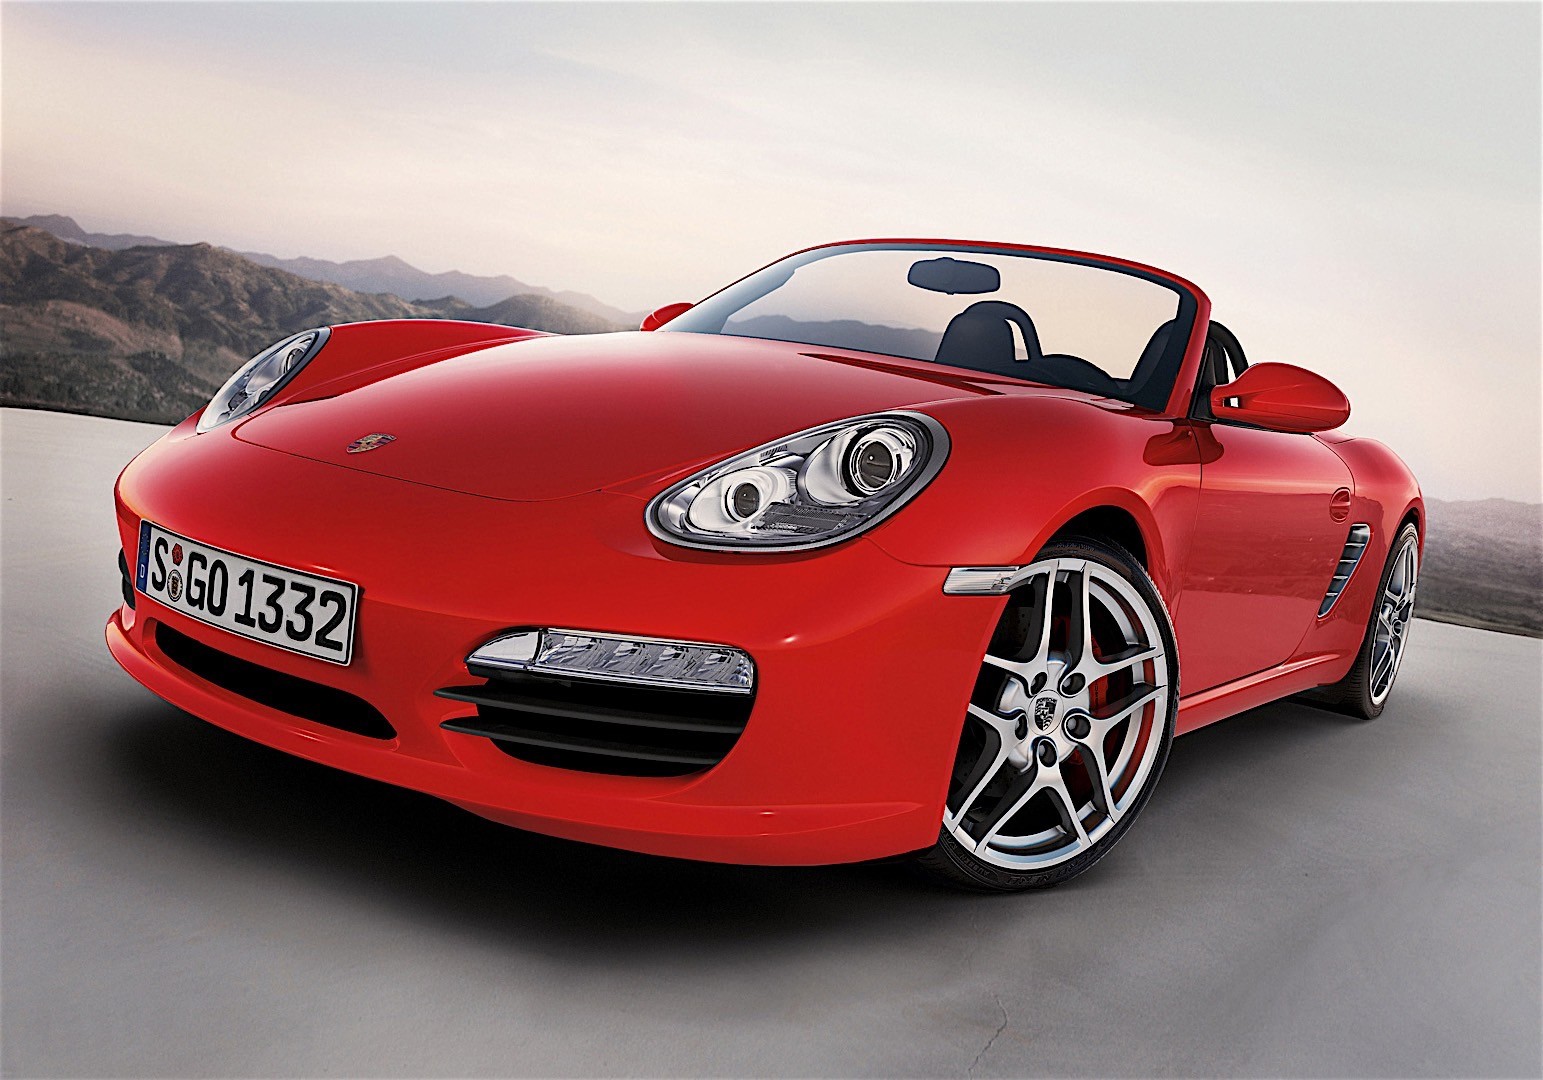 Porsche Boxster S (2010) – Specifications